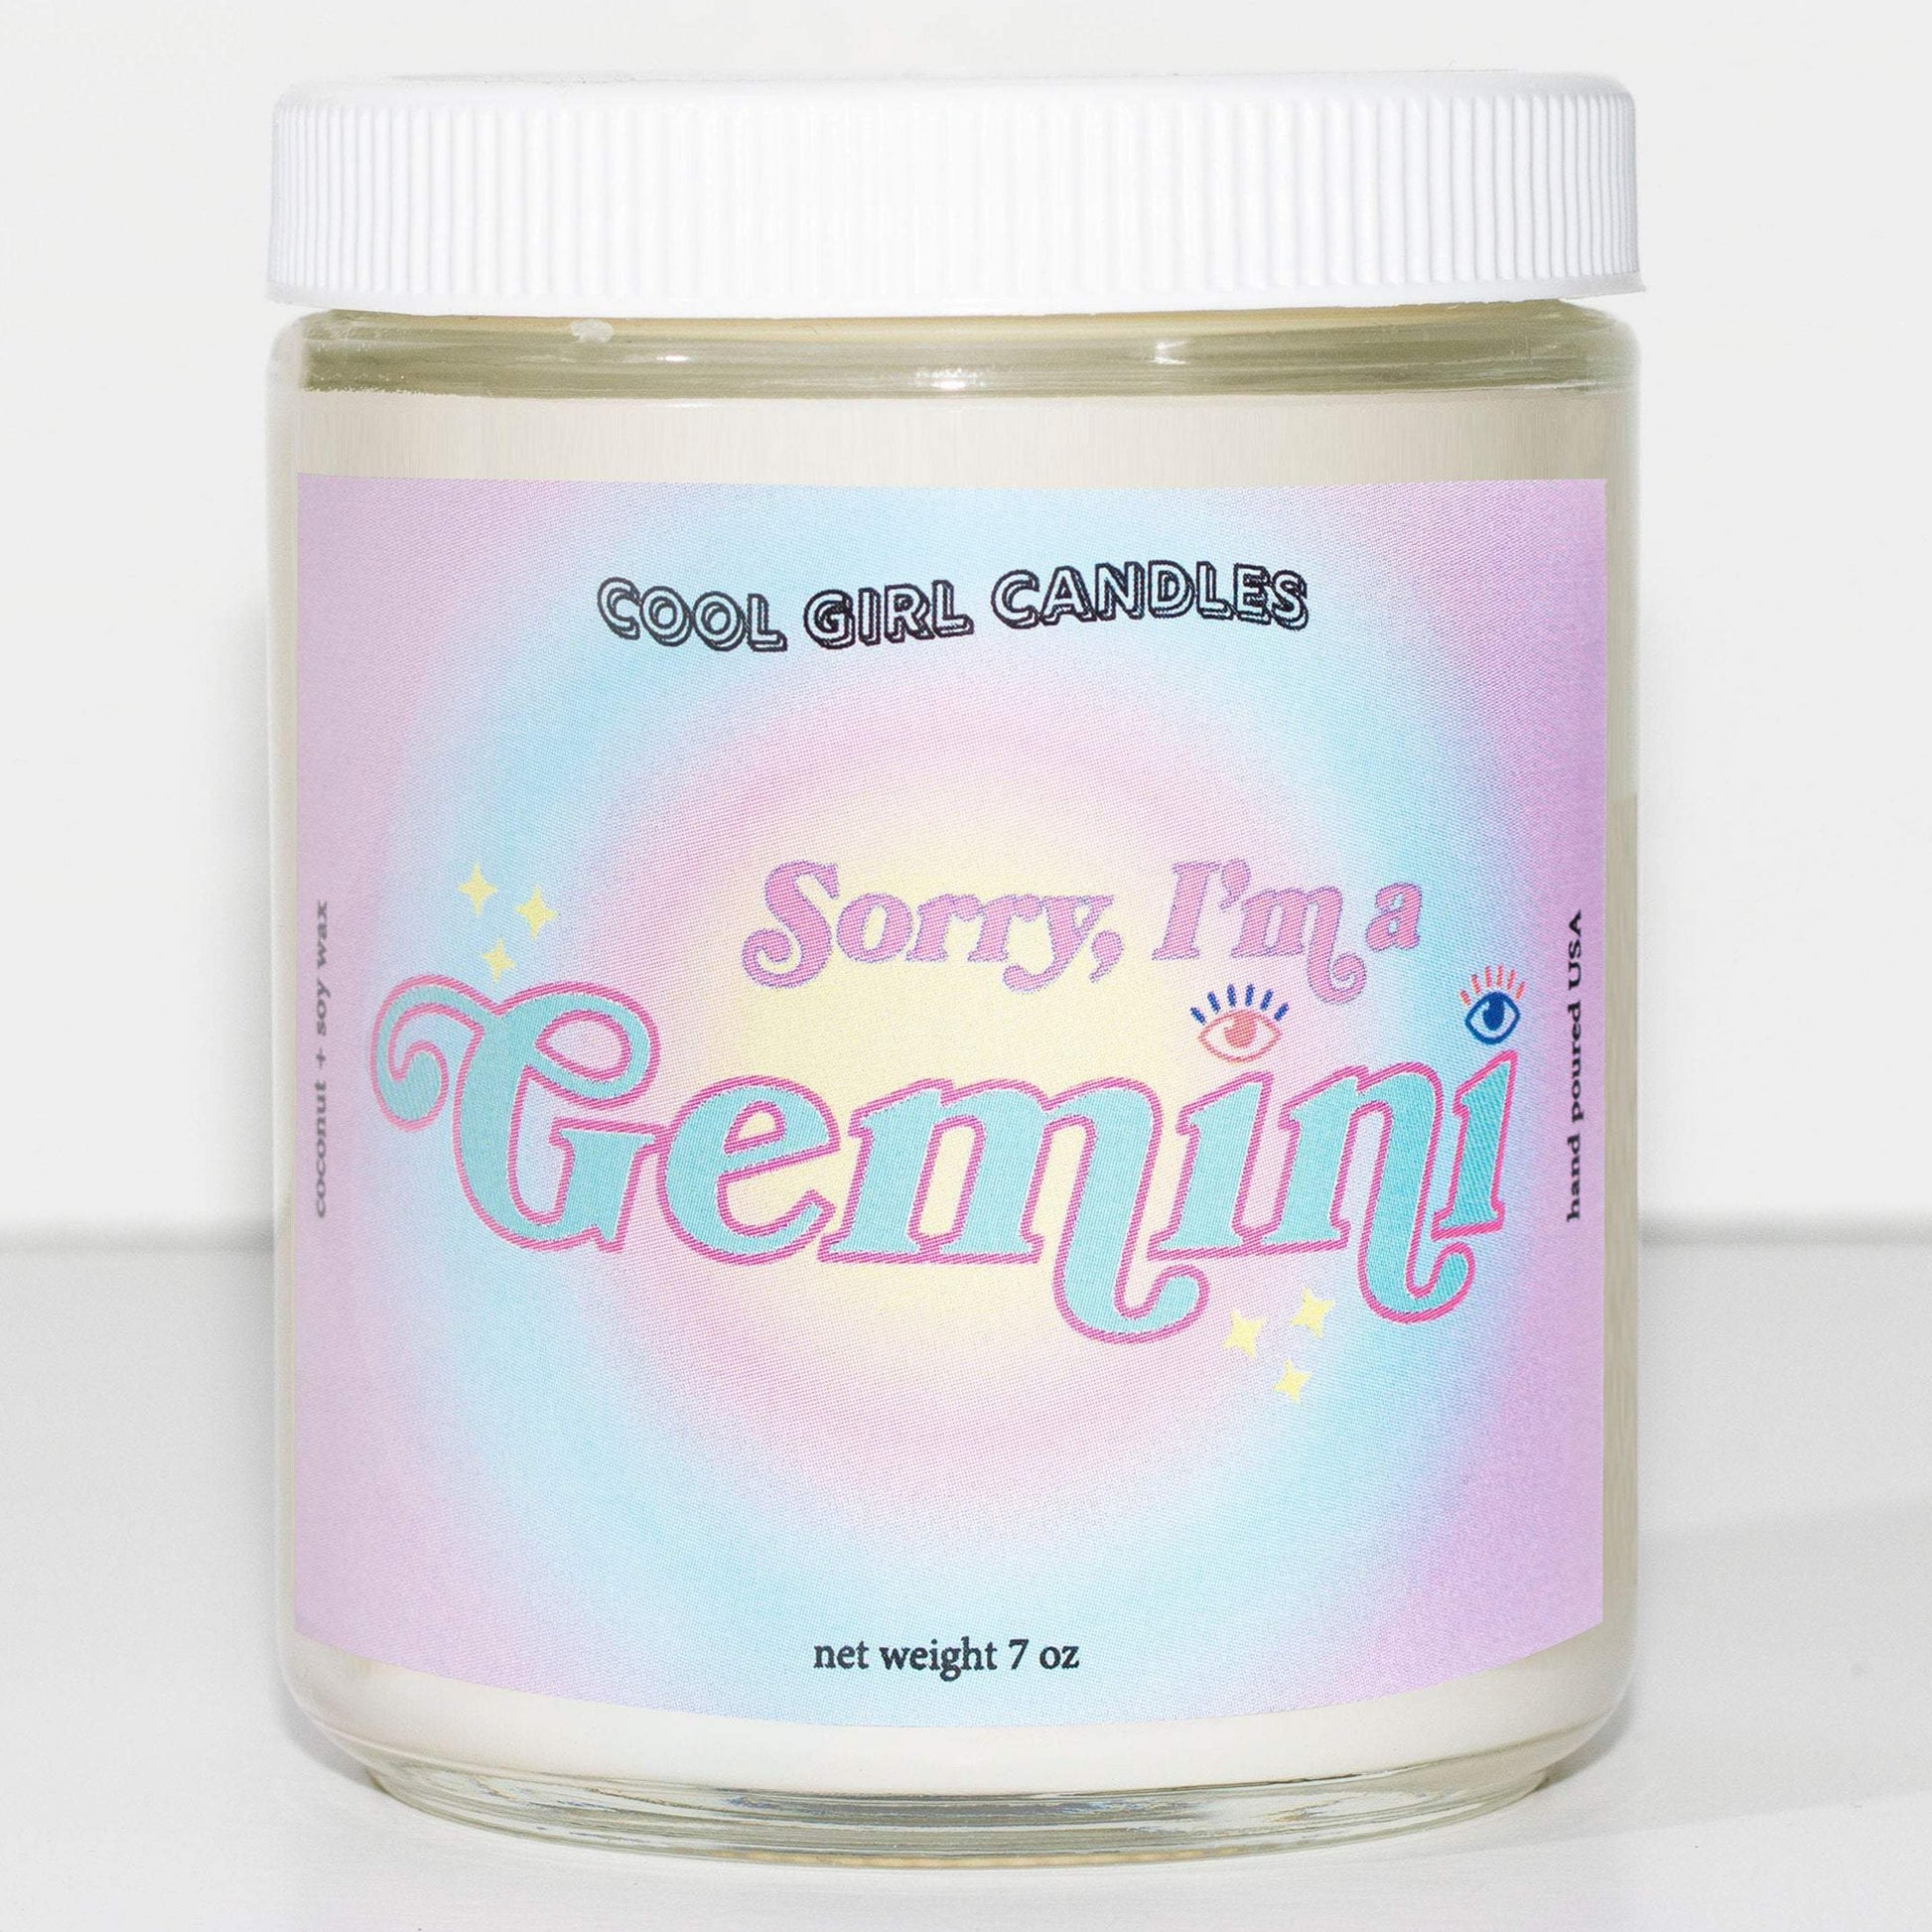 Gemini horoscope candle | Our Gemini zodiac candle has scents of sea salt, soft florals, and ozone notes for a calming, zen scent